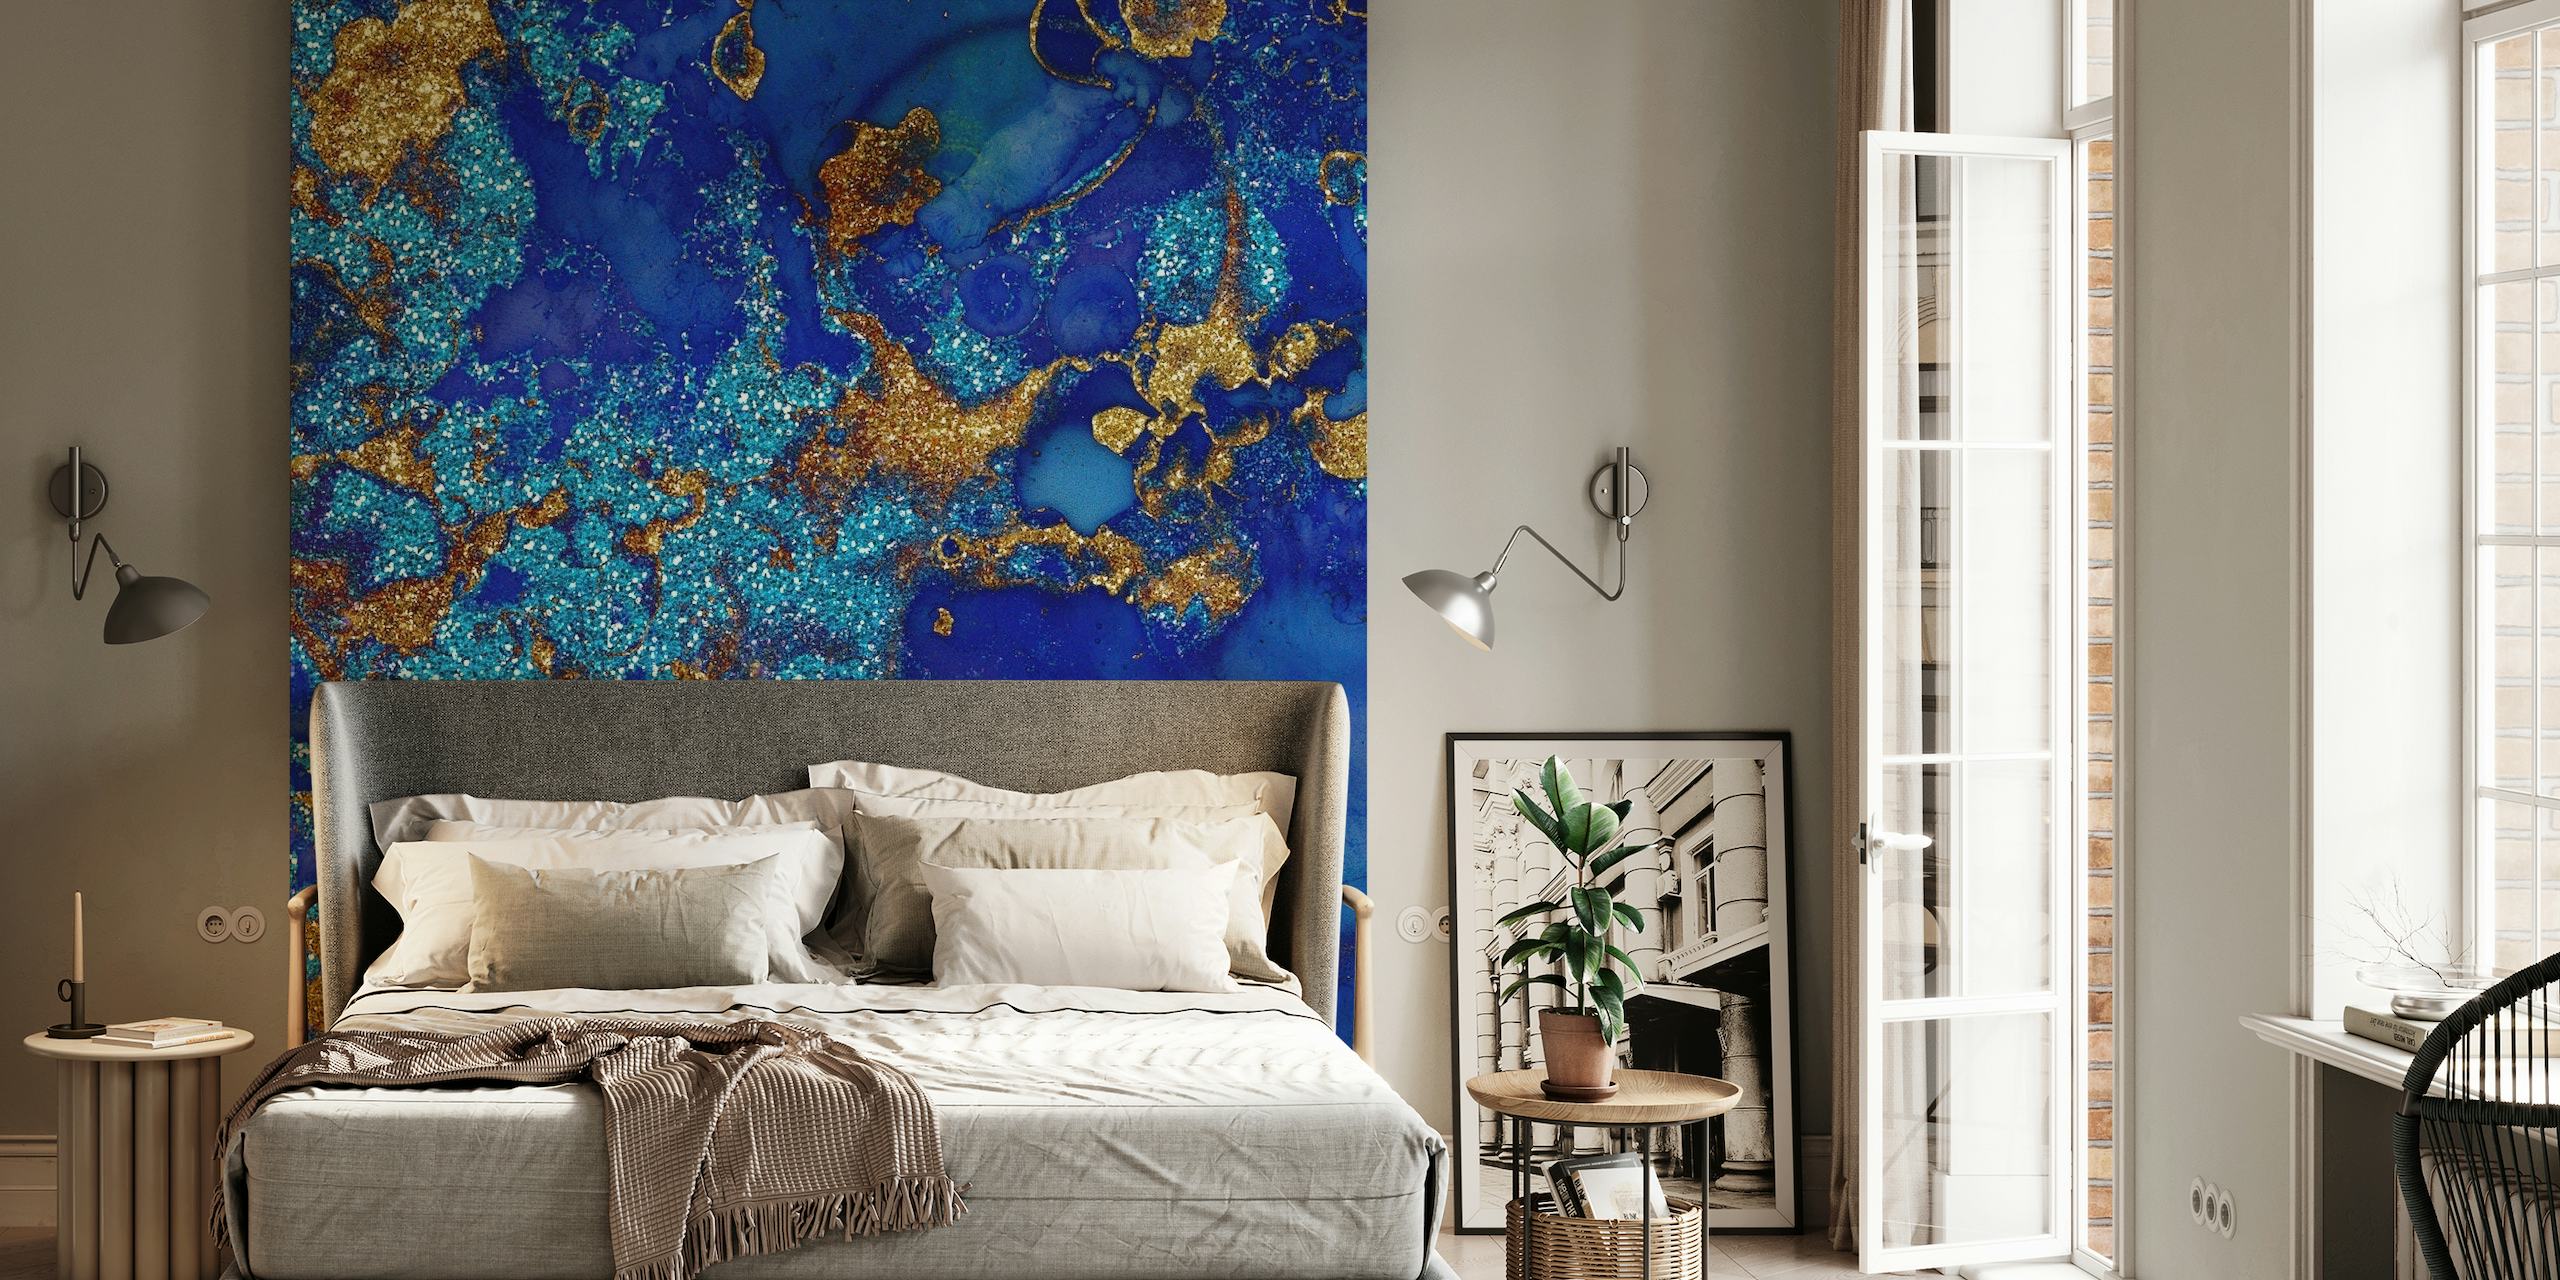 Indigo blue and gold glitter marble pattern wall mural